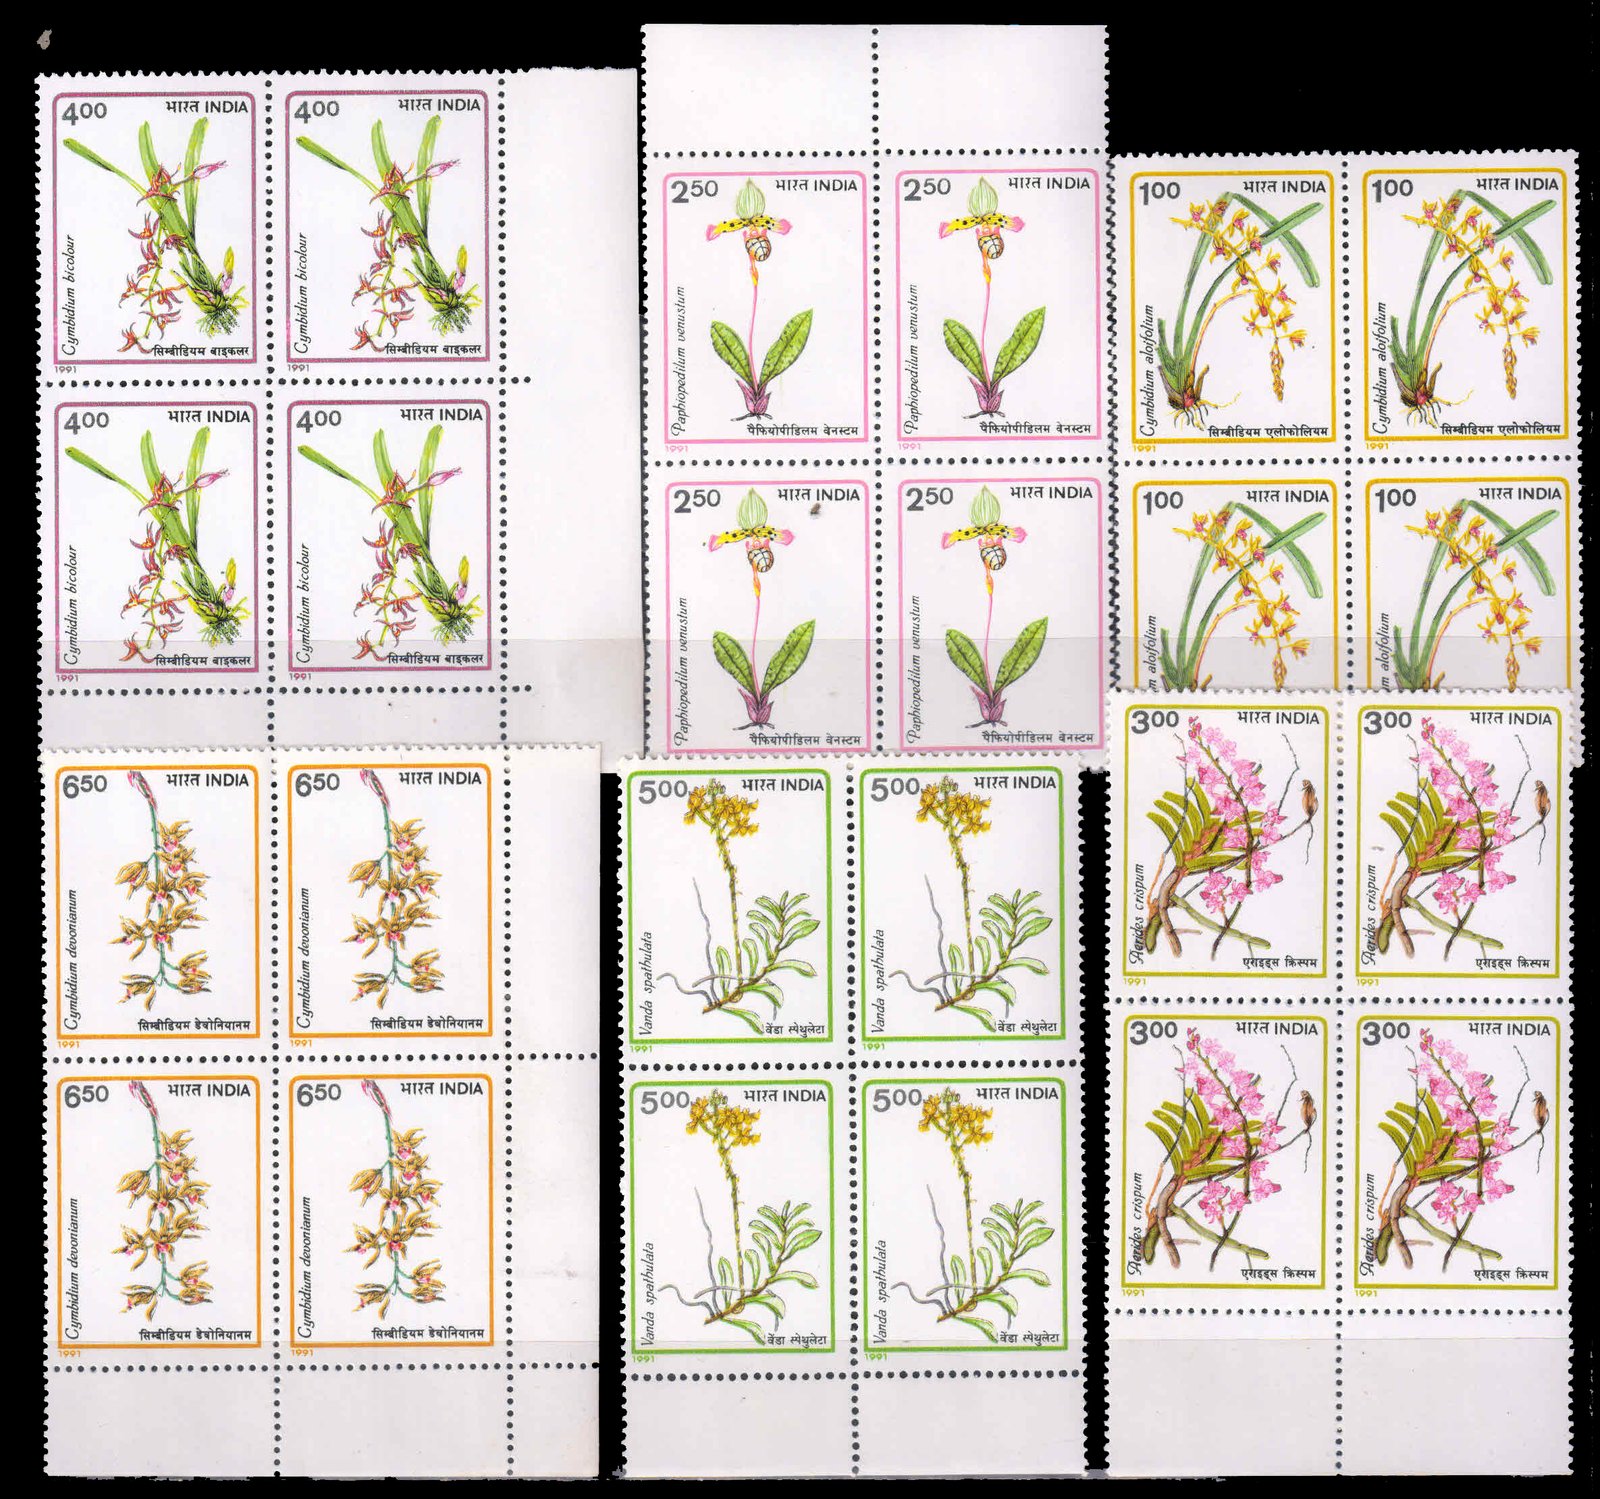 INDIA 1991-Orchids of India, Set of 6 Blocks, MNH, S.G. 1470-1475